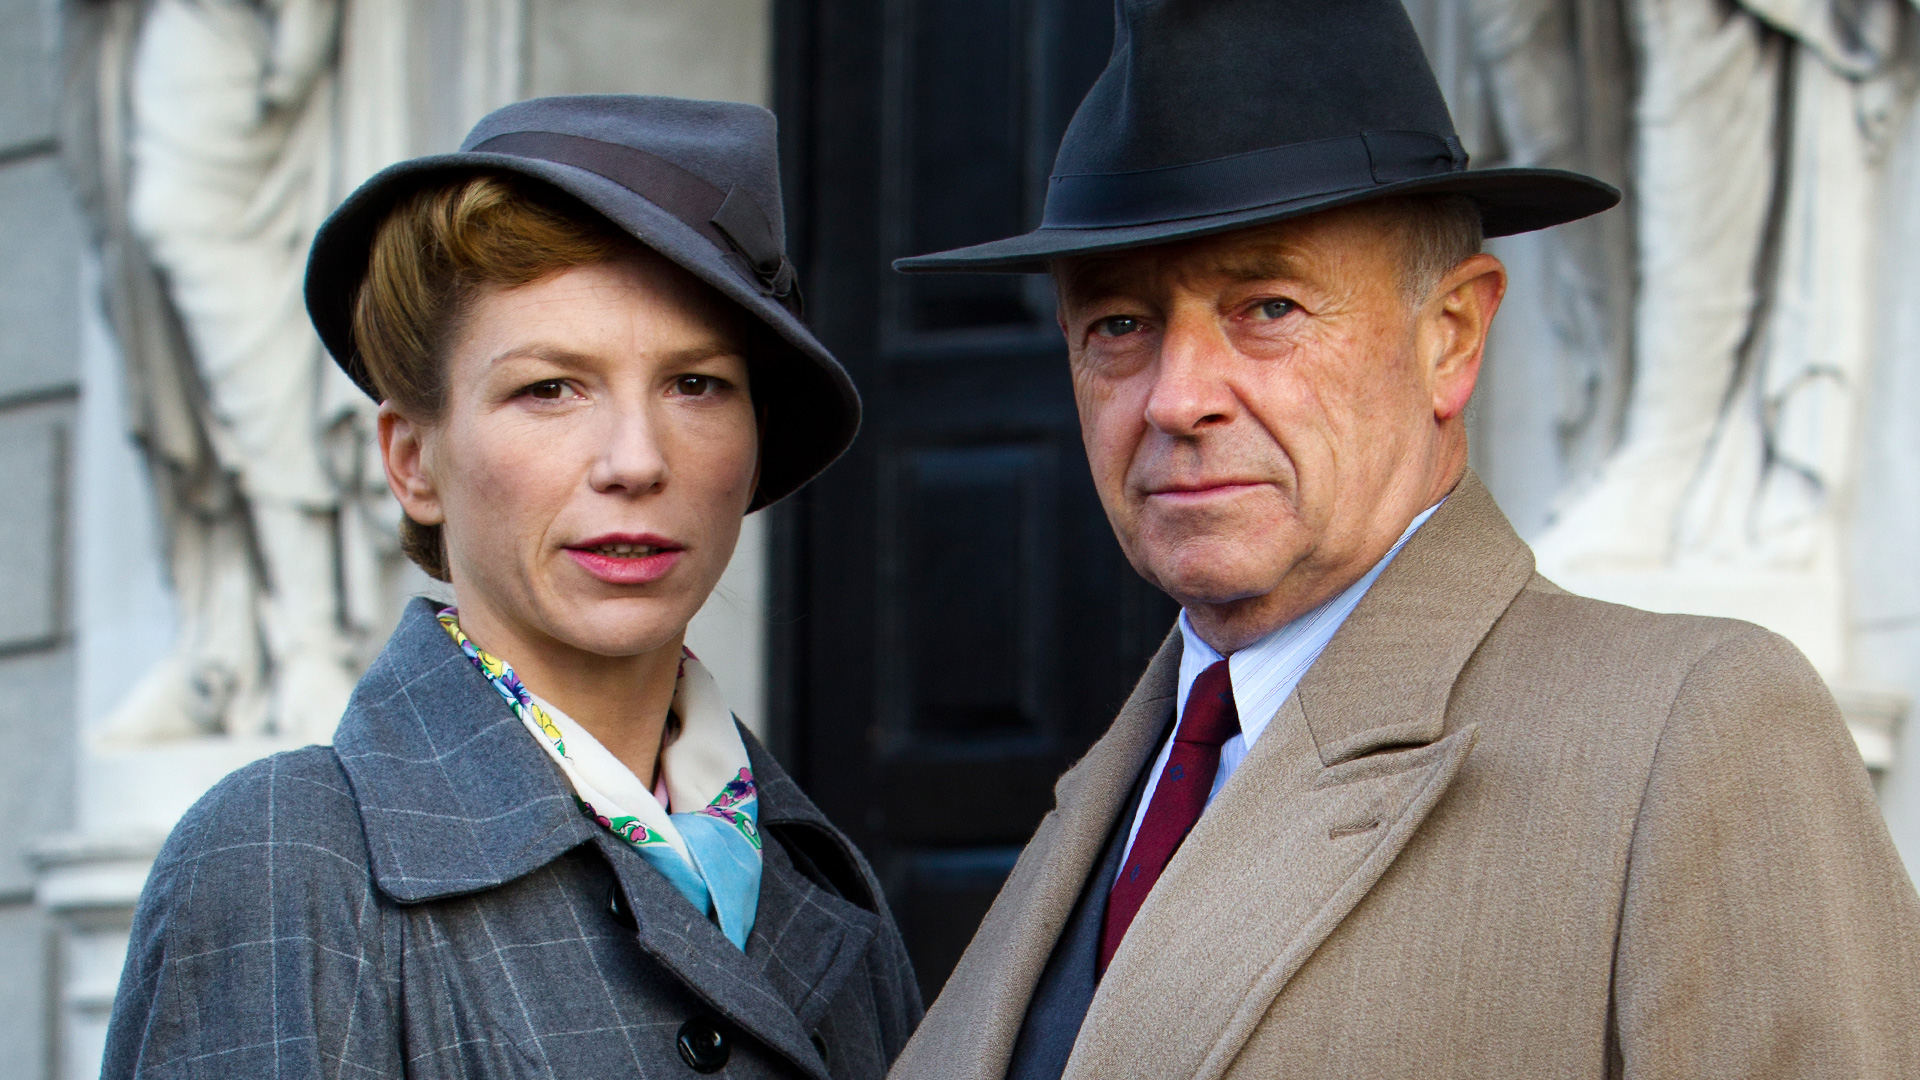 Foyle's War Series Creator Was Ready for UK Cancellation canceled